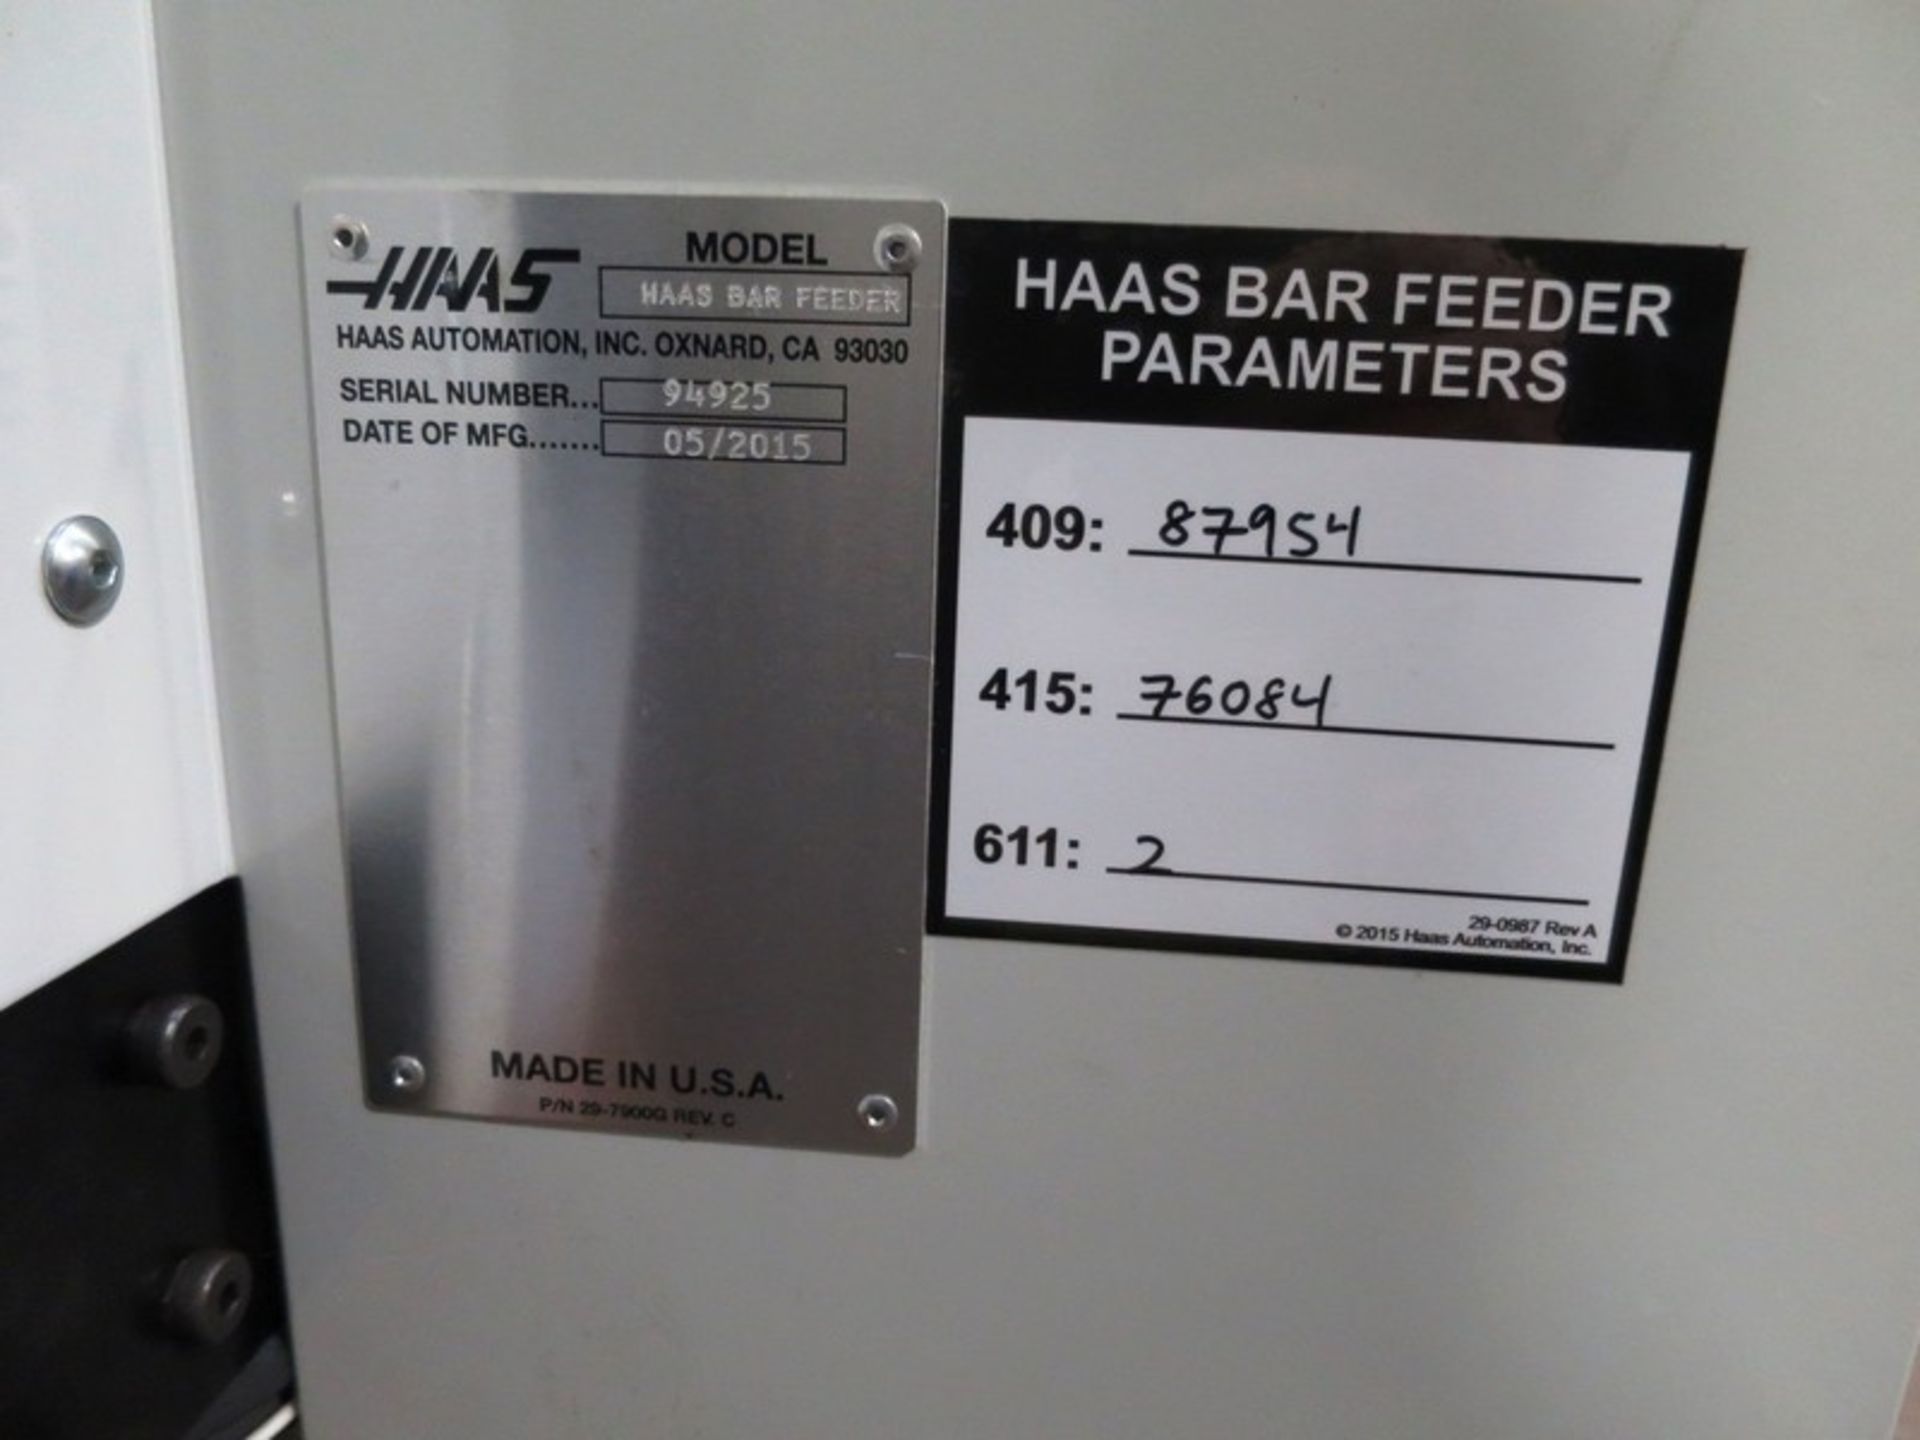 3.125 Haas Servo Magazine Type Bar Feeder, S/N 94925, New 2015 General Specifications, Capacity ( - Image 4 of 5